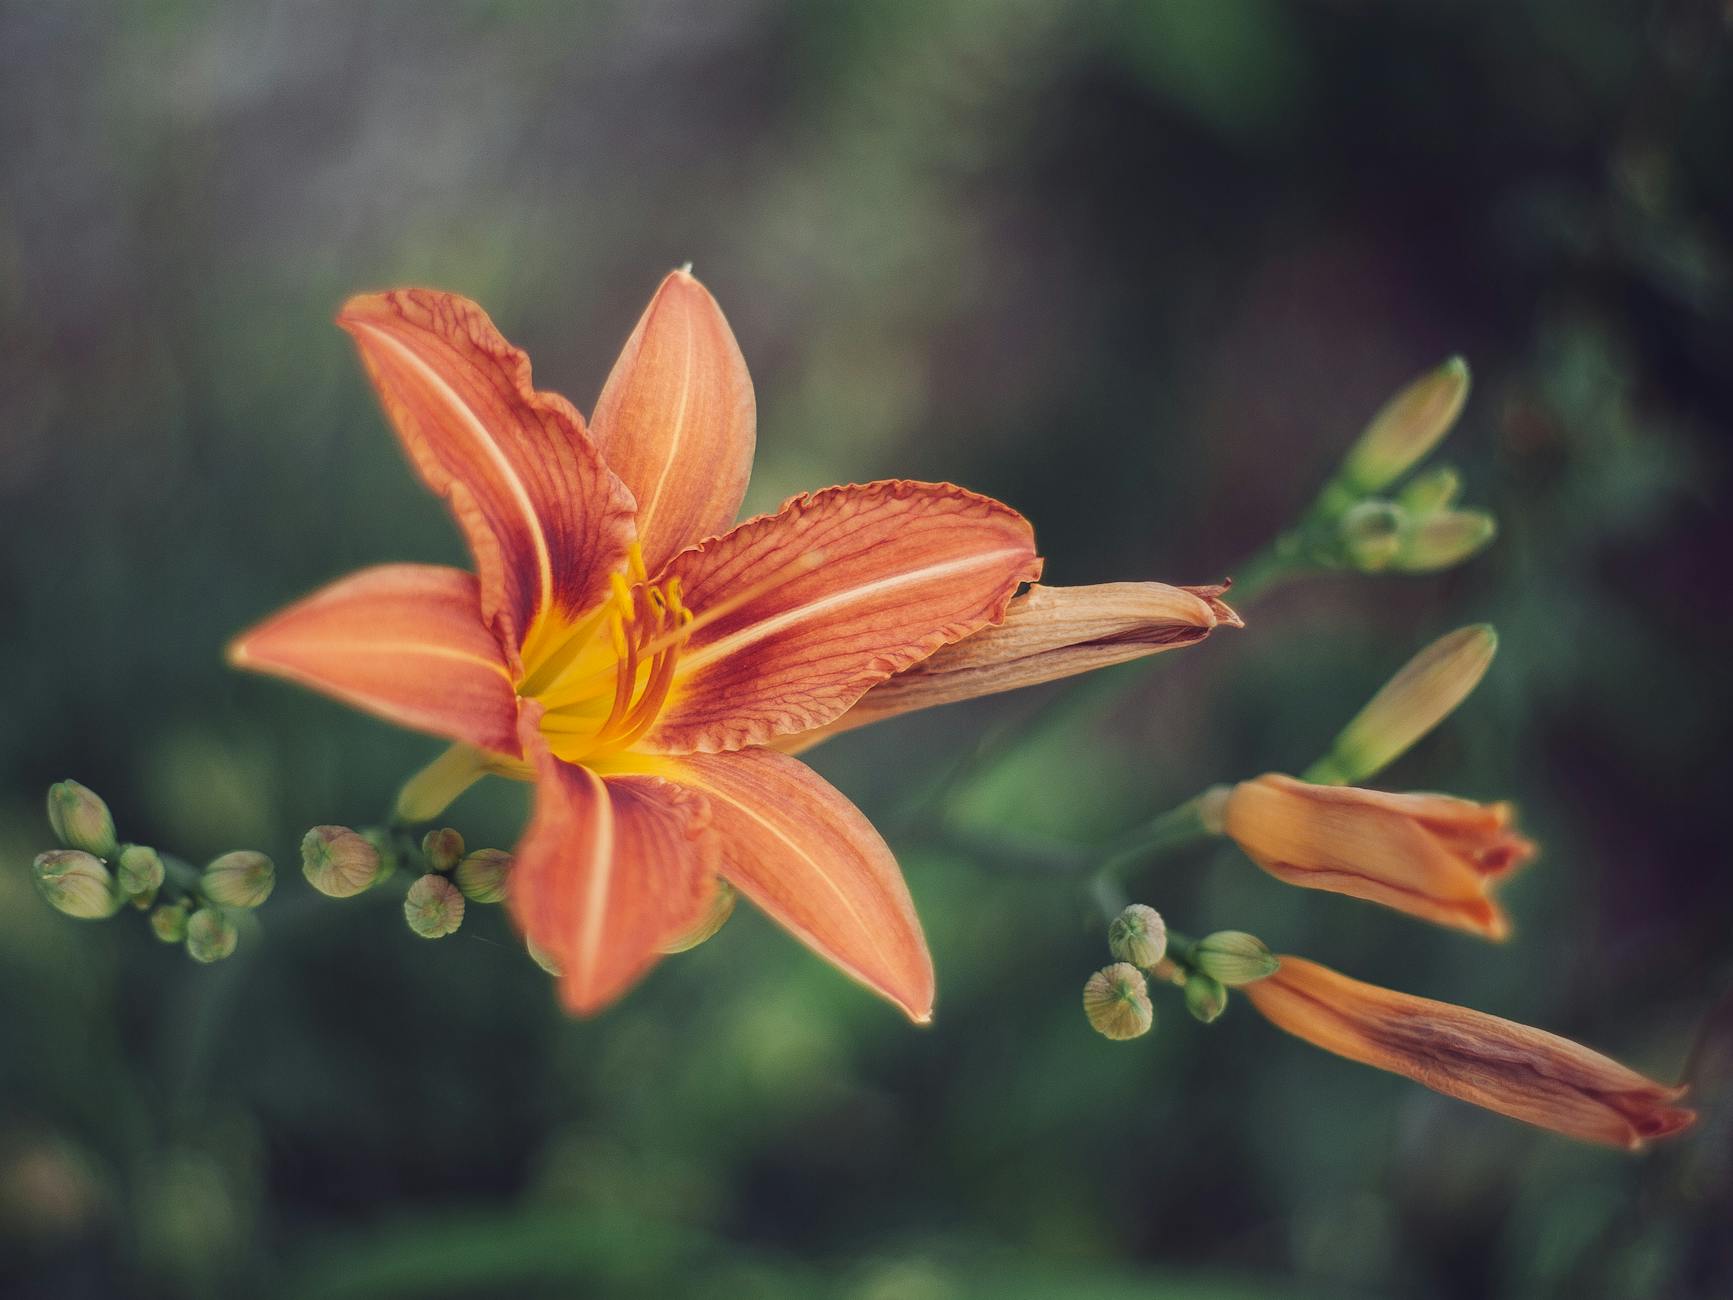 The Tiger Lily means splendor.